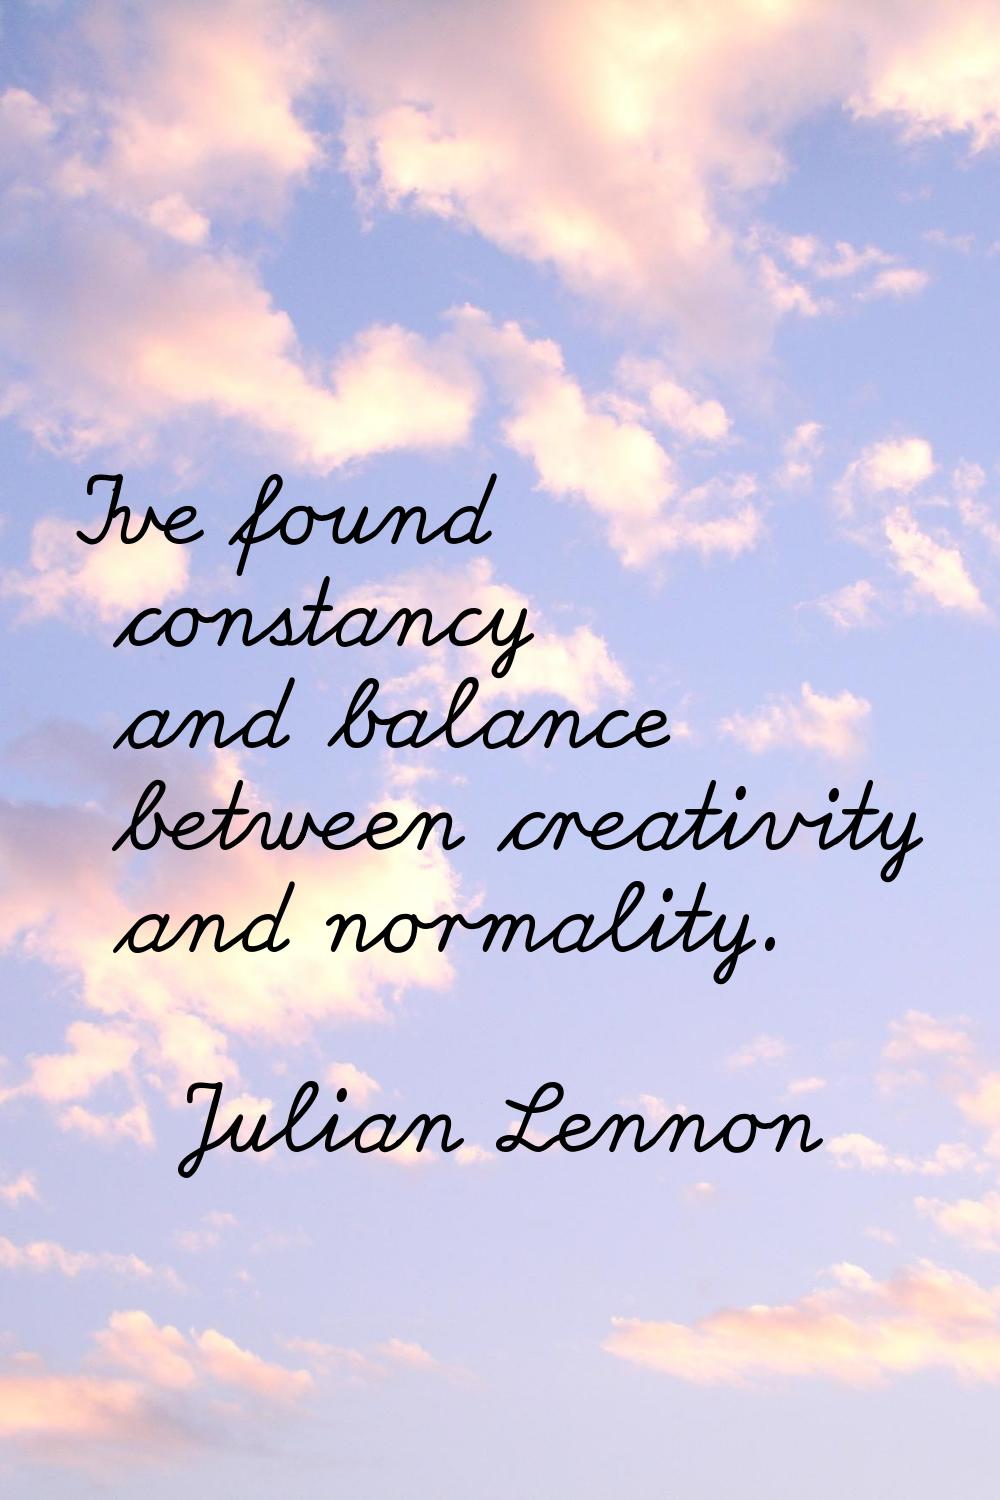 I've found constancy and balance between creativity and normality.